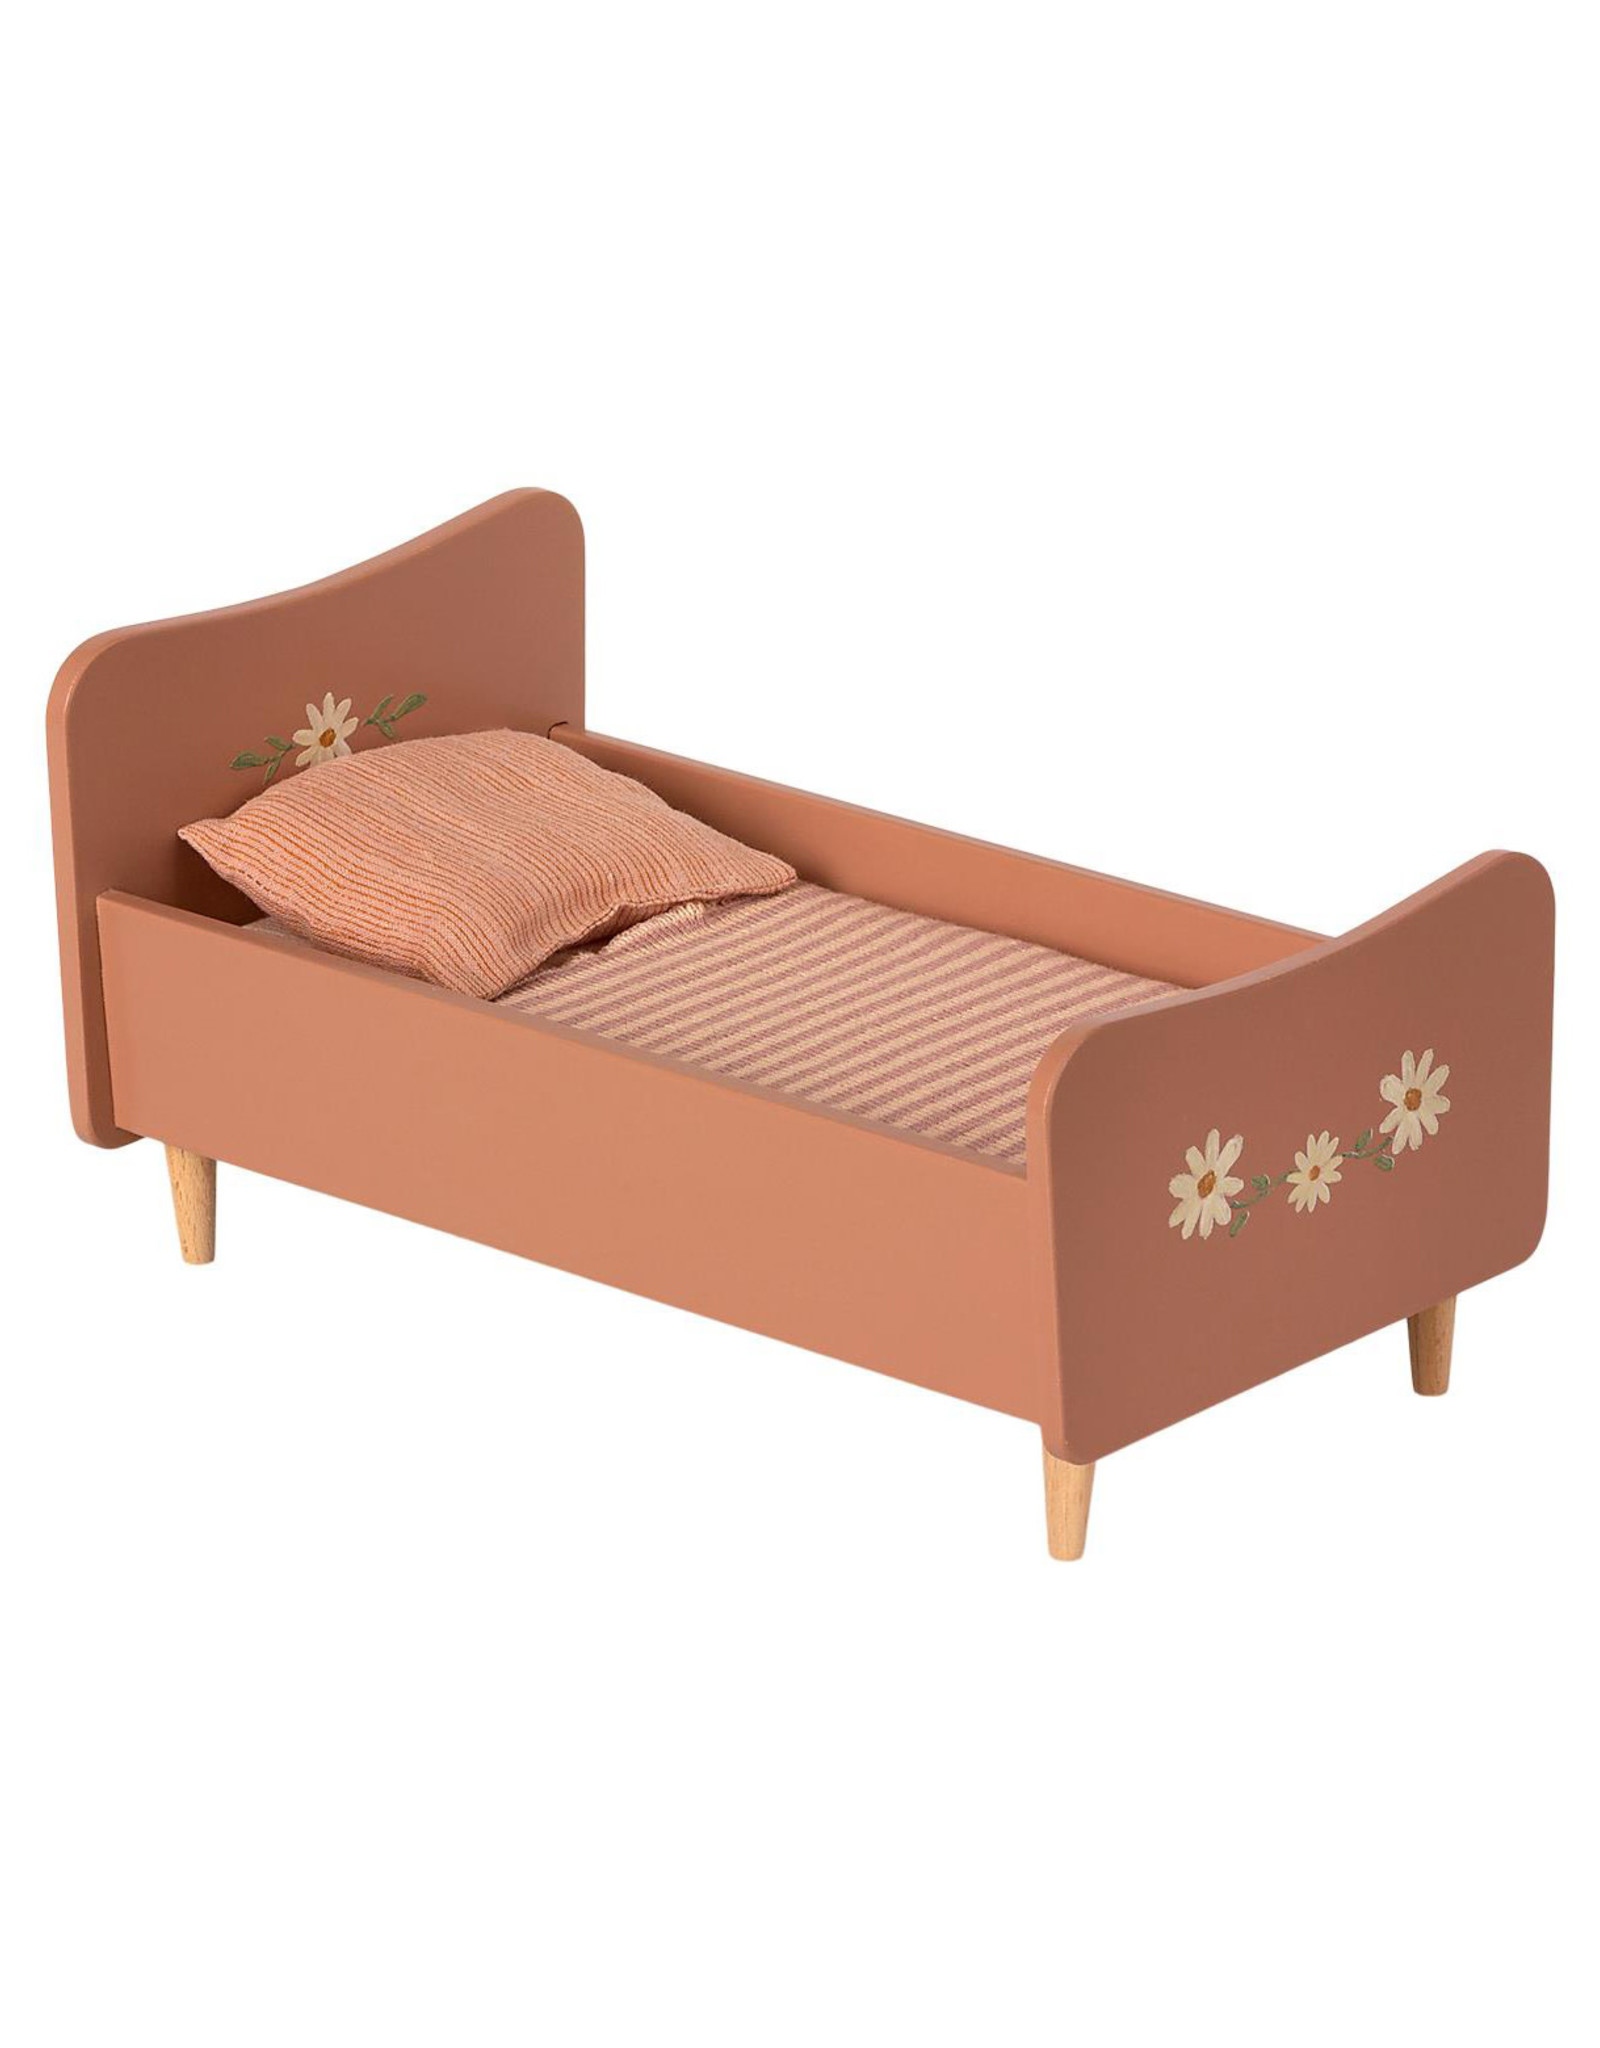 Maileg Mini Wooden Bed - Rose